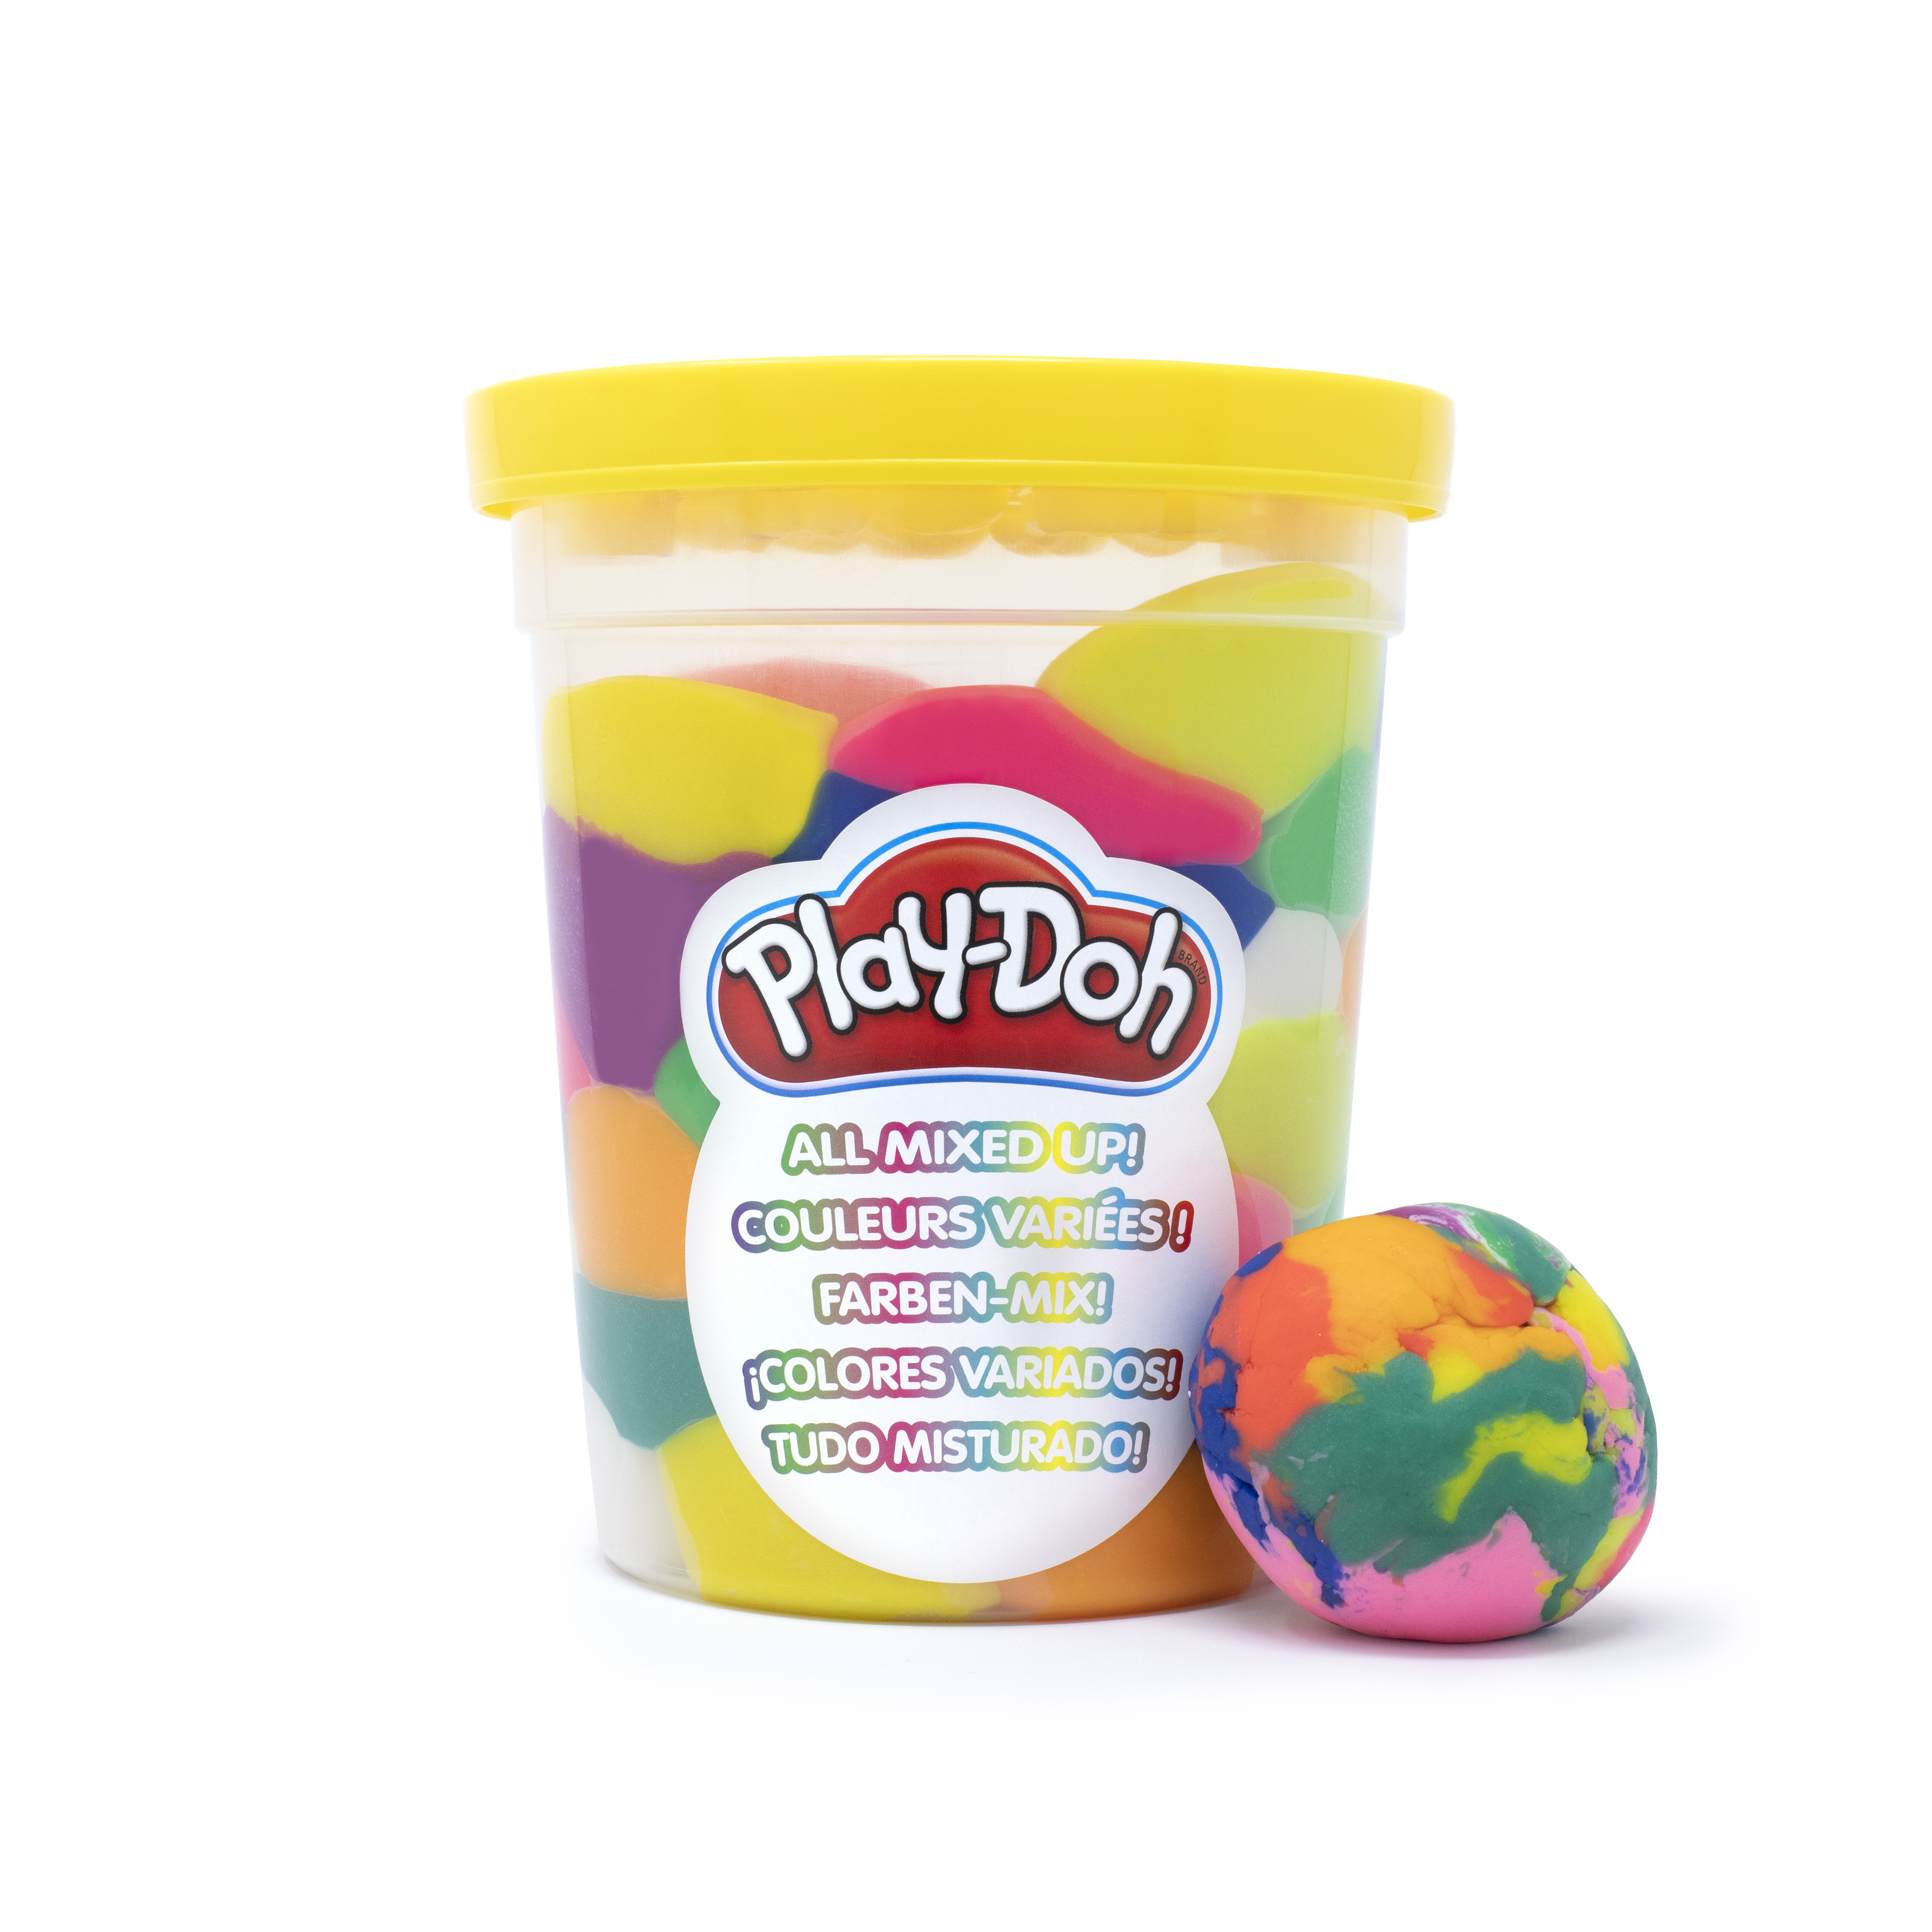 Play-Doh's New 'All Mixed Up' Product Preemptively Jumbles Your